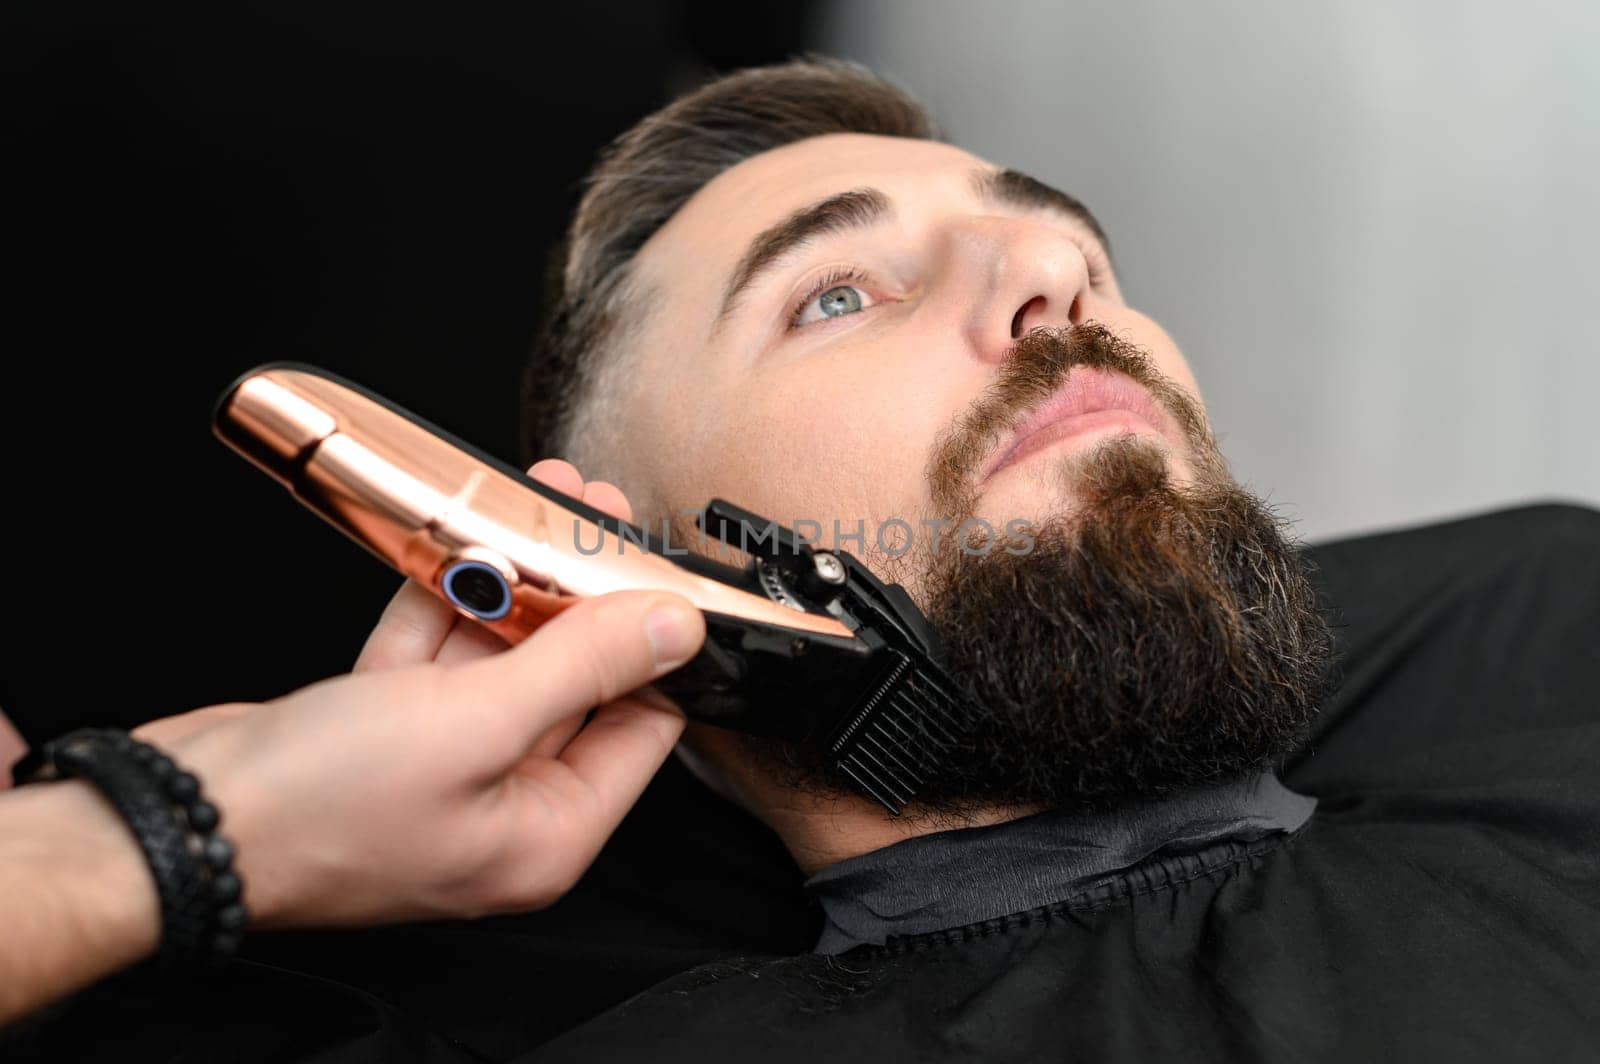 Cutting a gentlemans beard in a barbershop with a clipper. Shortening the length of the beard from the sides by the master for the client. by Niko_Cingaryuk